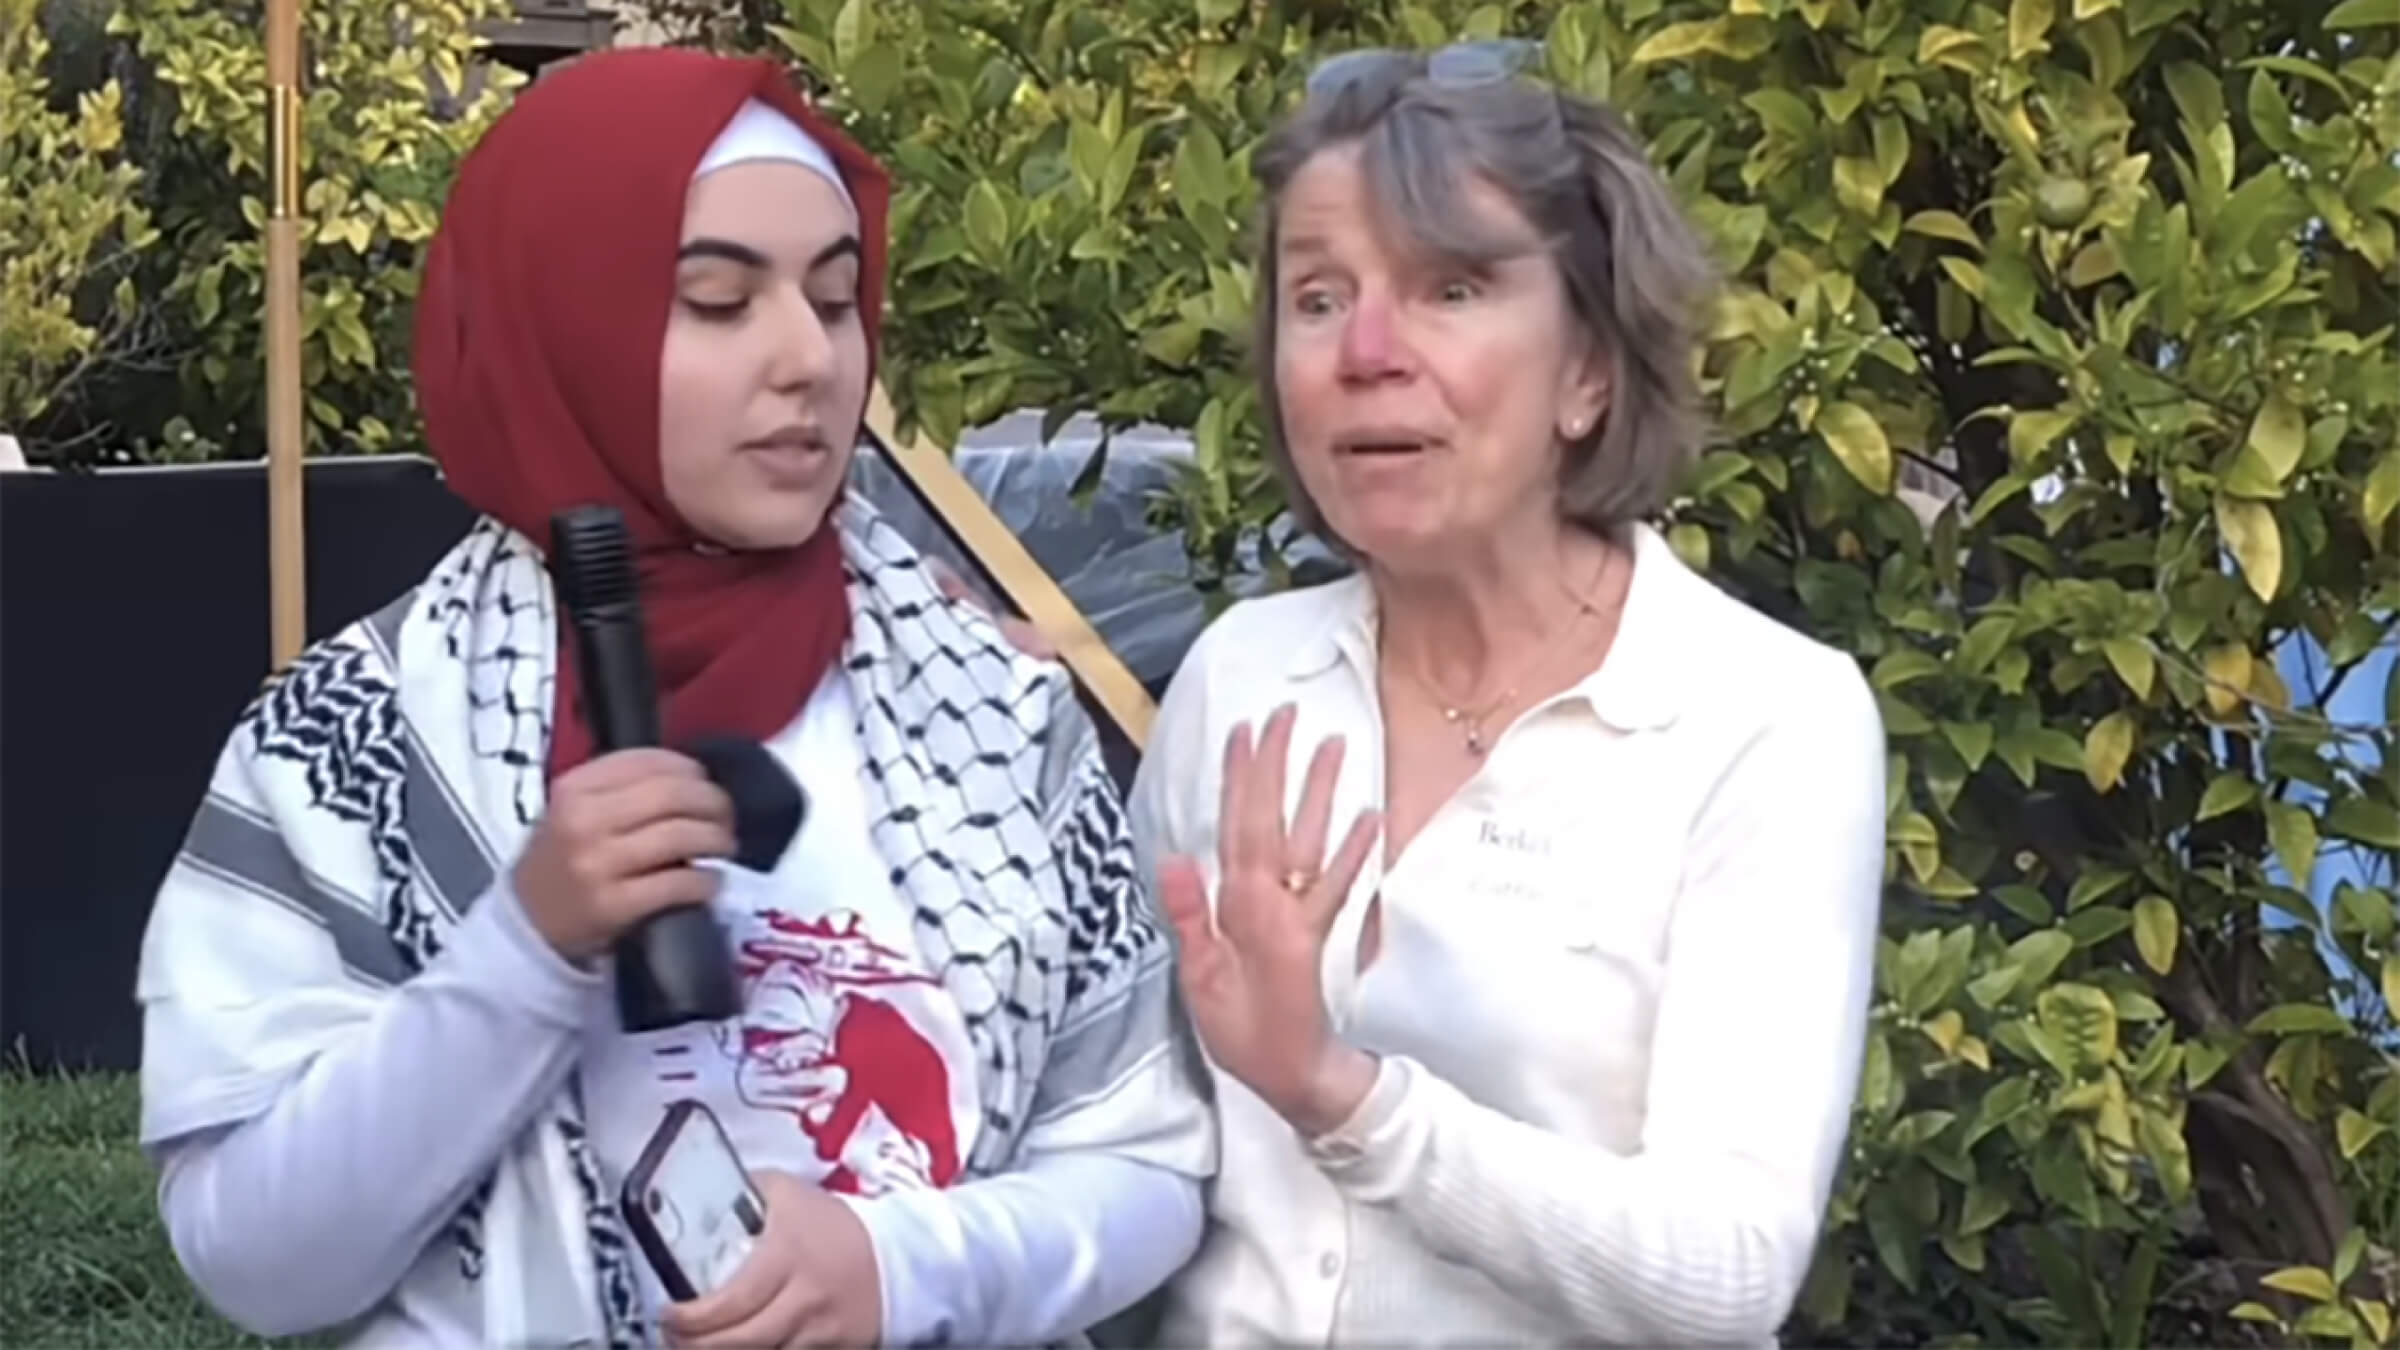 UC Berkeley law professor Catherine Fisk attempts to get law student Malak Afaneh to leave the home Fisk shares with her husband, Berkeley law Dean Erwin Chemerinsky, April 9, 2024.